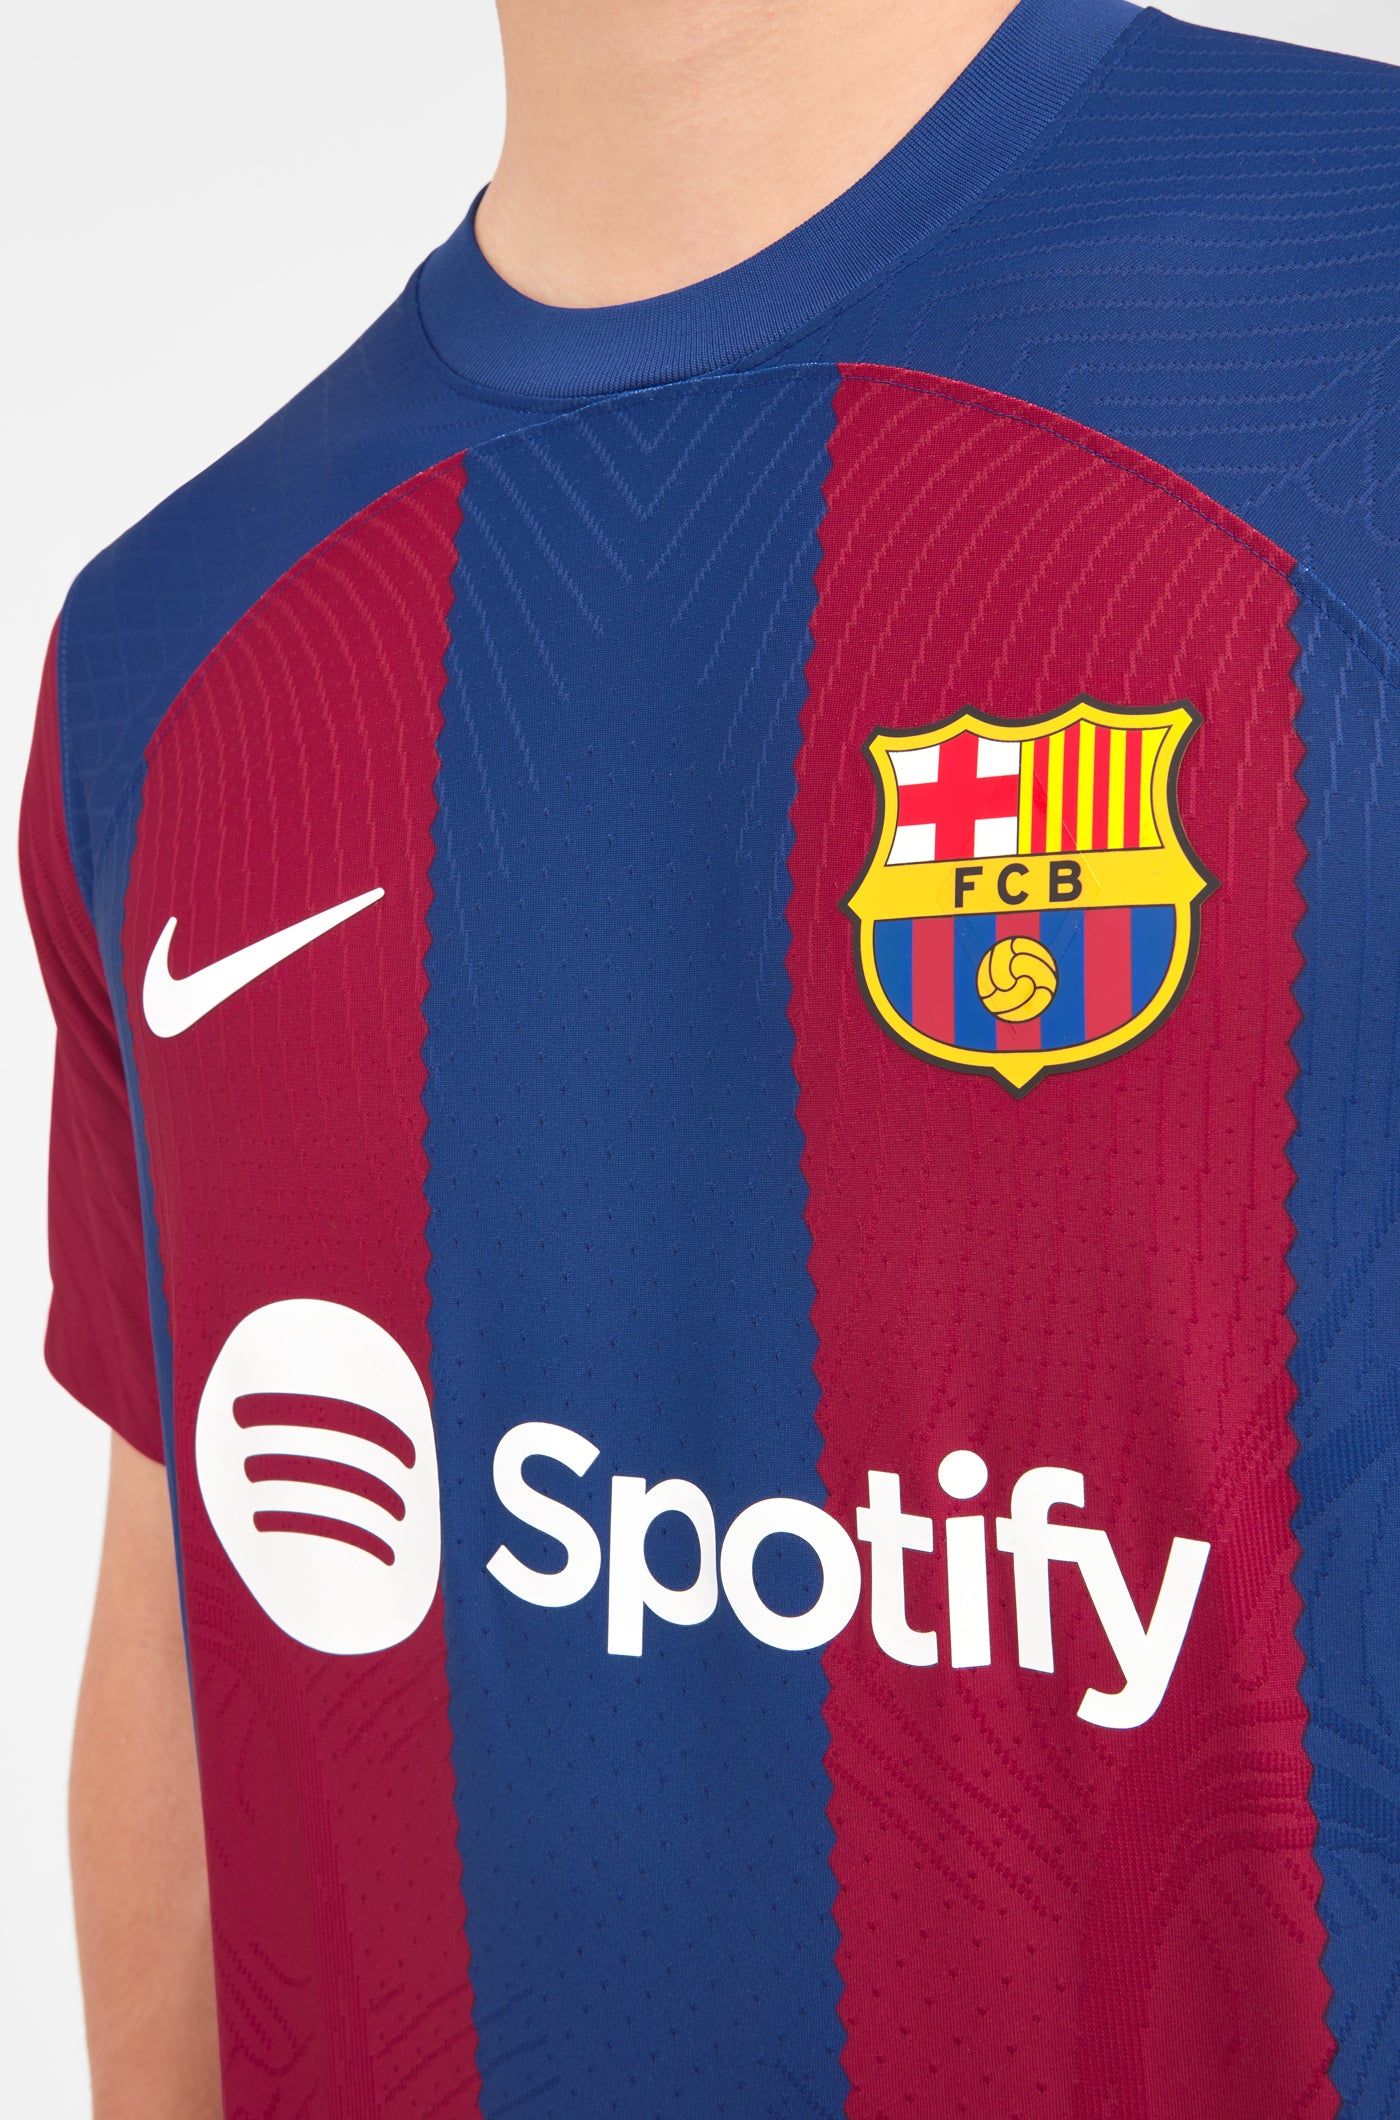 UCL FC Barcelona home jersey 23/24 Player's Edition